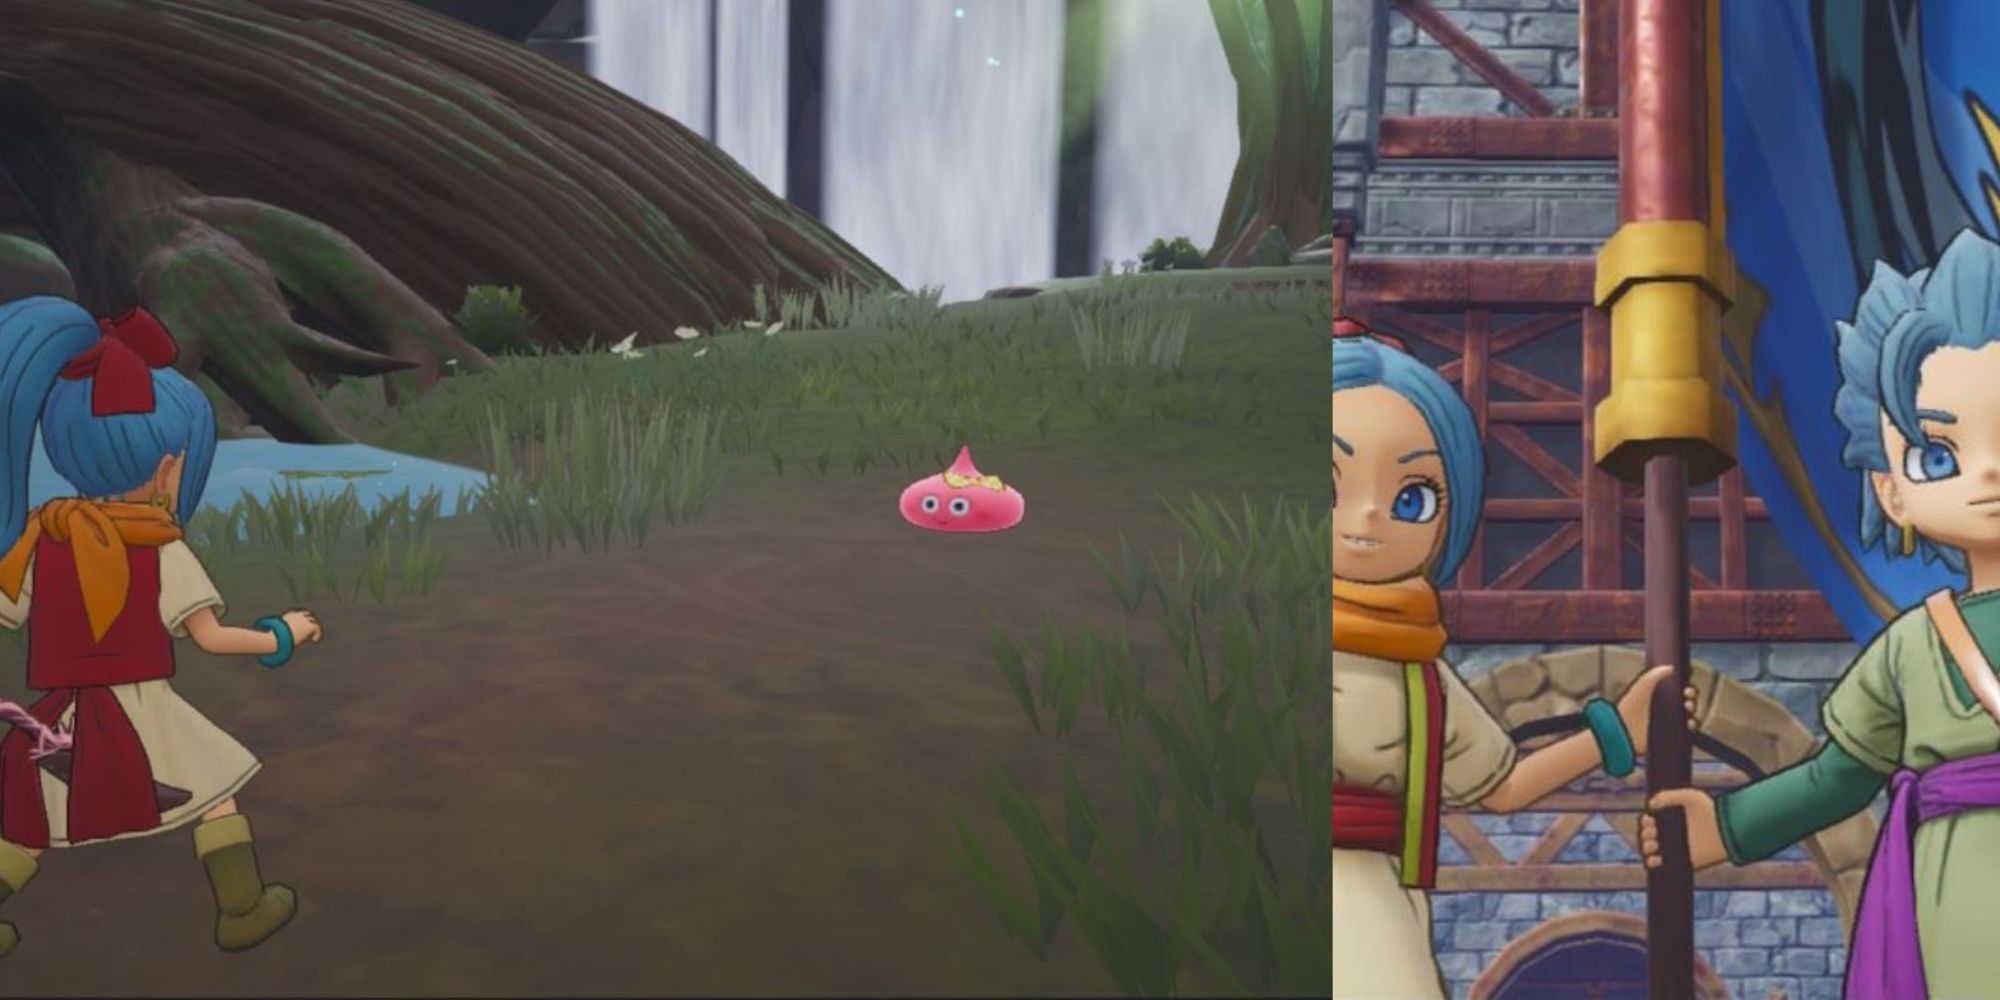 A collage of Mia finding a Cutie Slime and Erik and Mia creating their treasure hunting base.